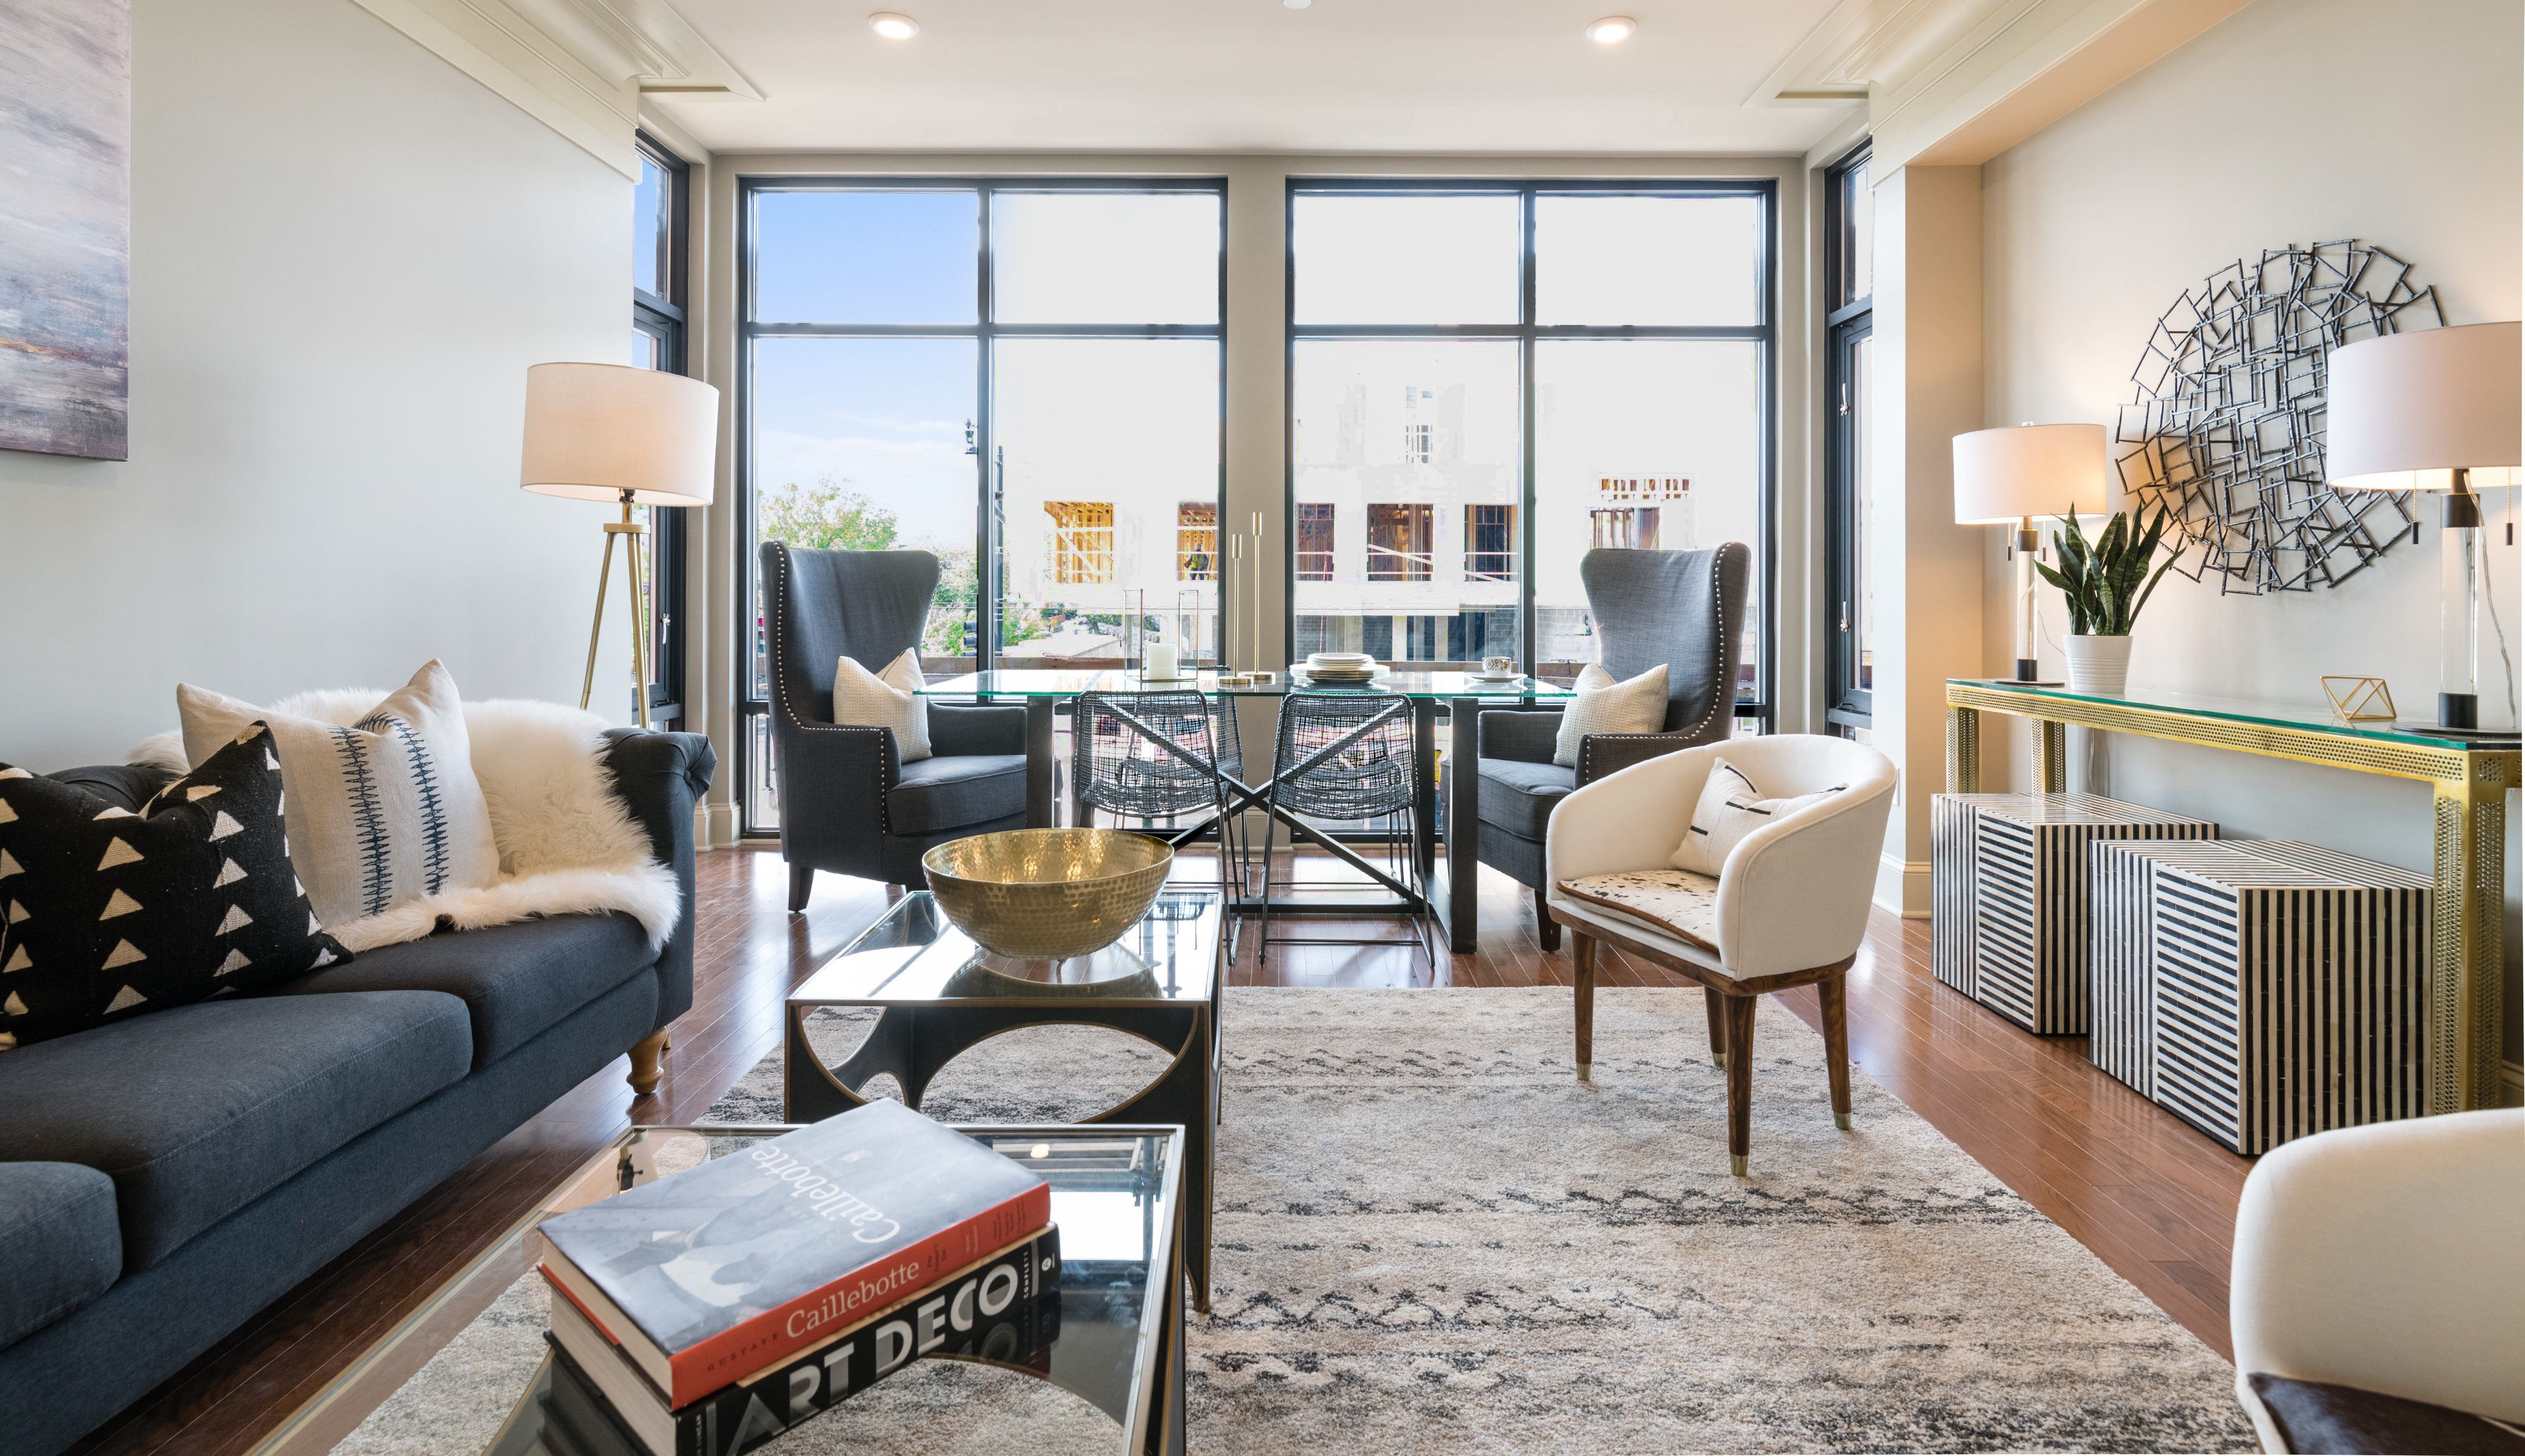 9 New H Street Condos Combine Modern Luxury with Old World Charm: Figure 1